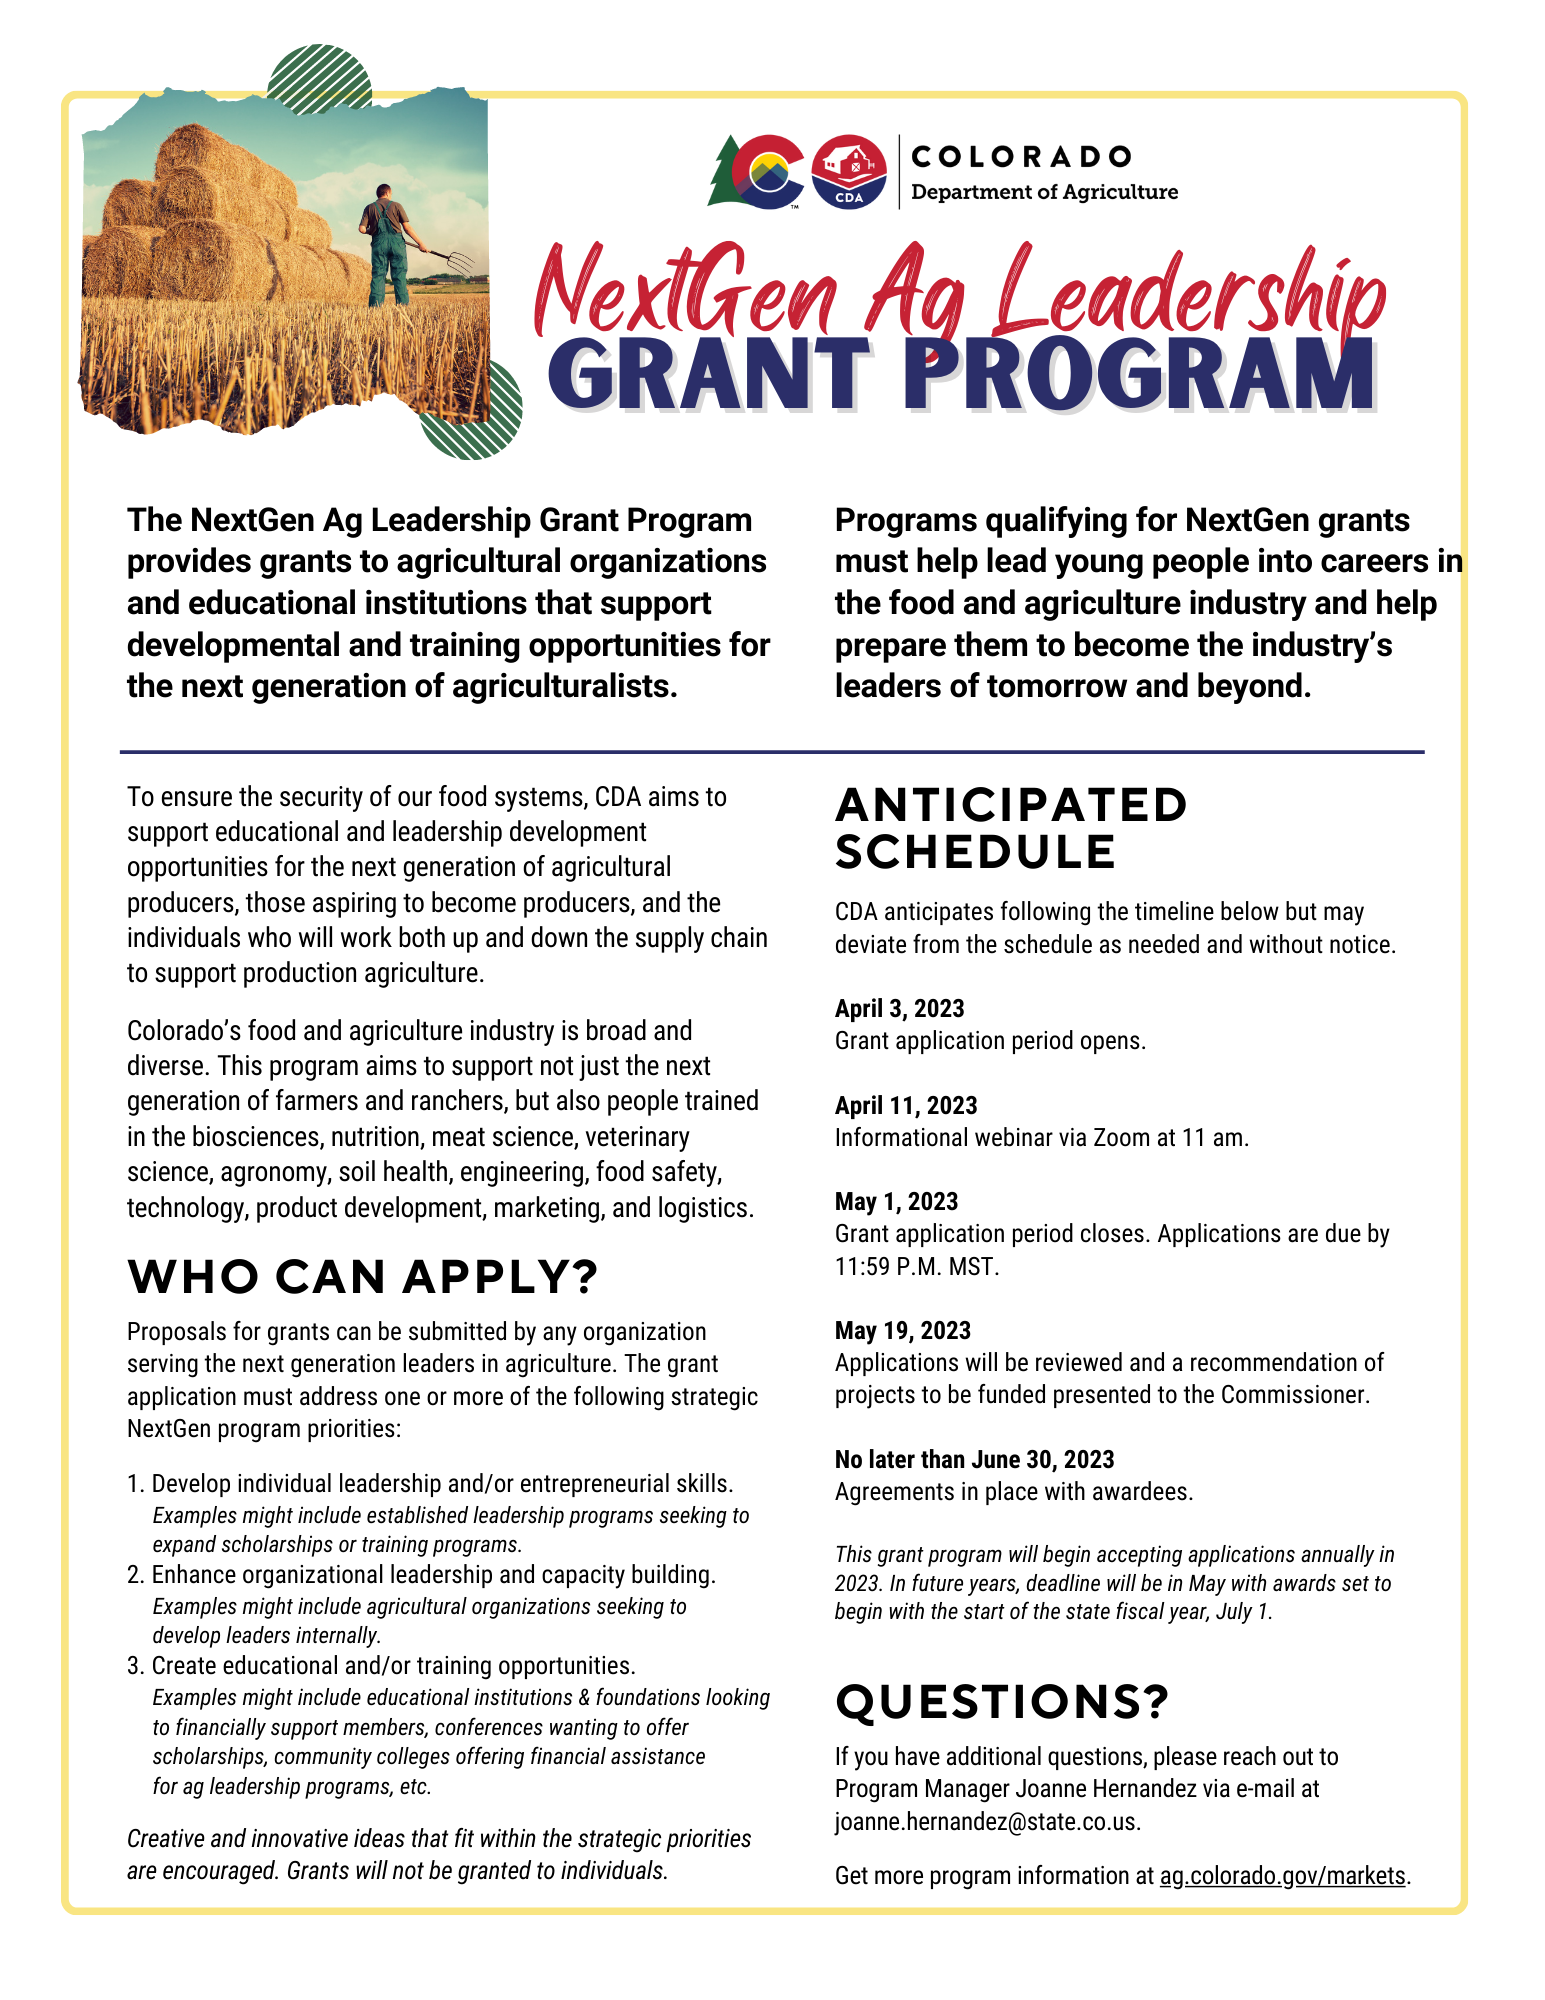 2023 NextGen Ag Leadership Grant Program small graphic with program details and anticipated schedule.